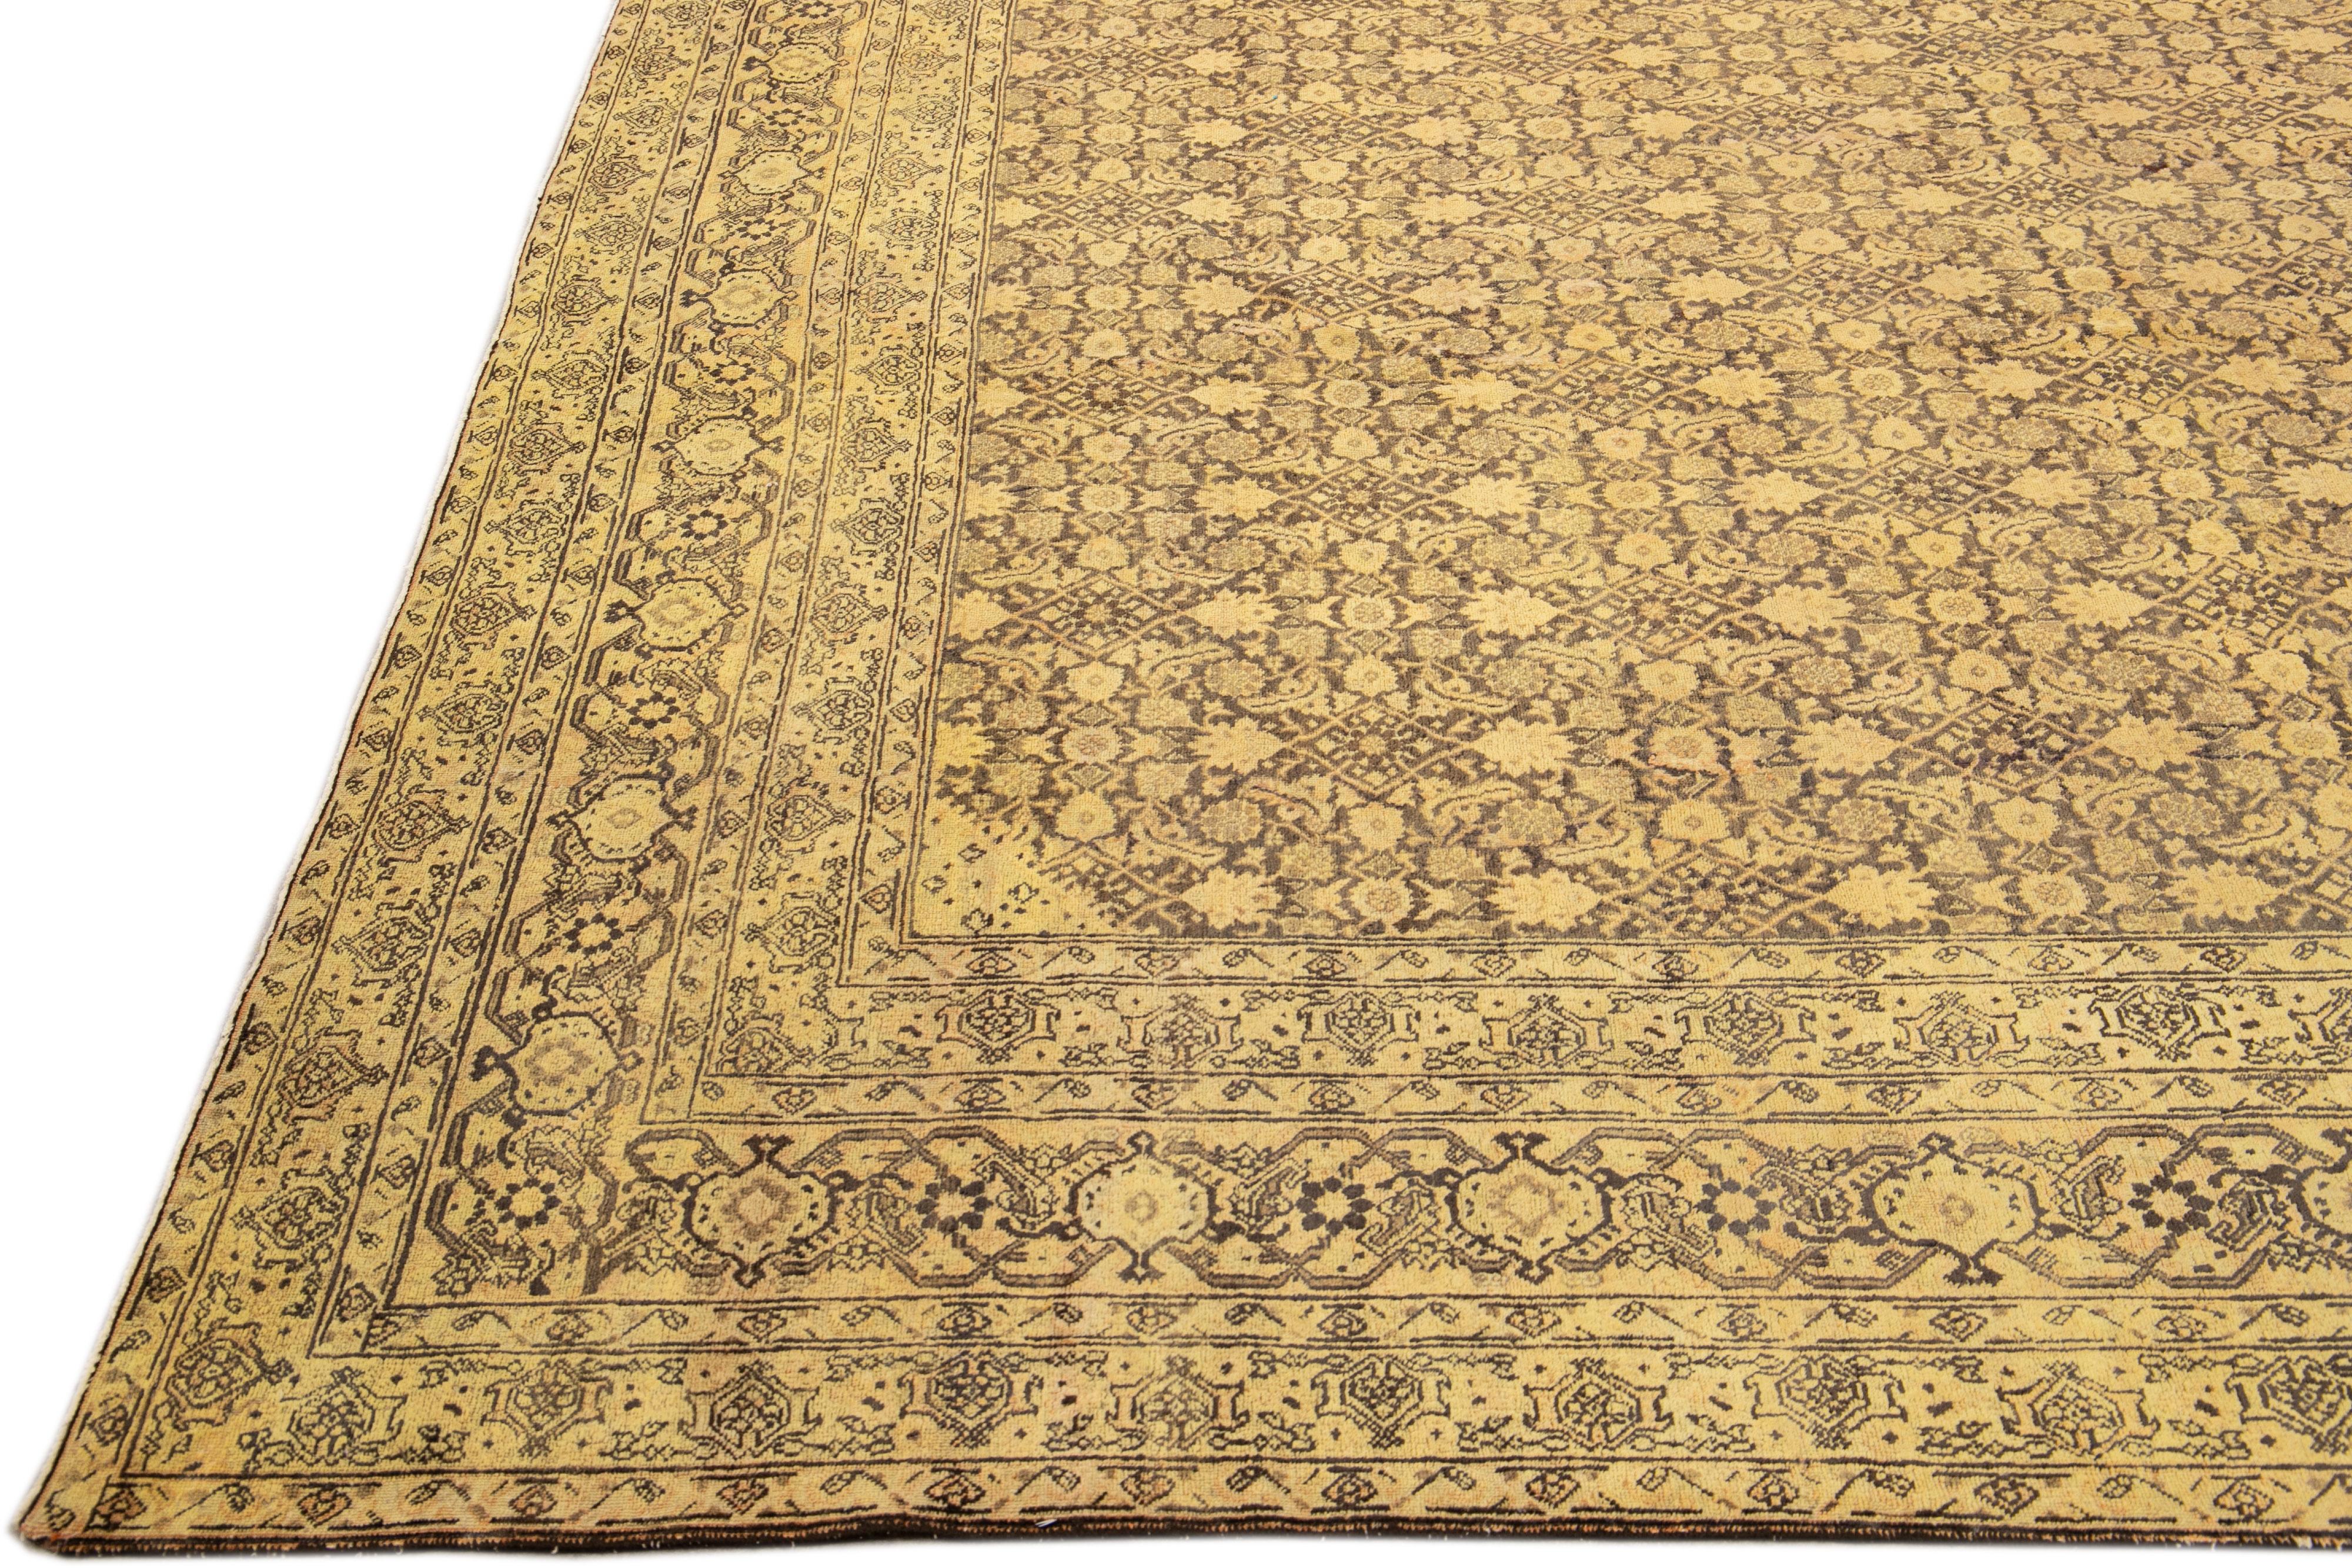 Antique Tabriz Beige Handmade Persian Wool Rug with Allover Design In Excellent Condition For Sale In Norwalk, CT